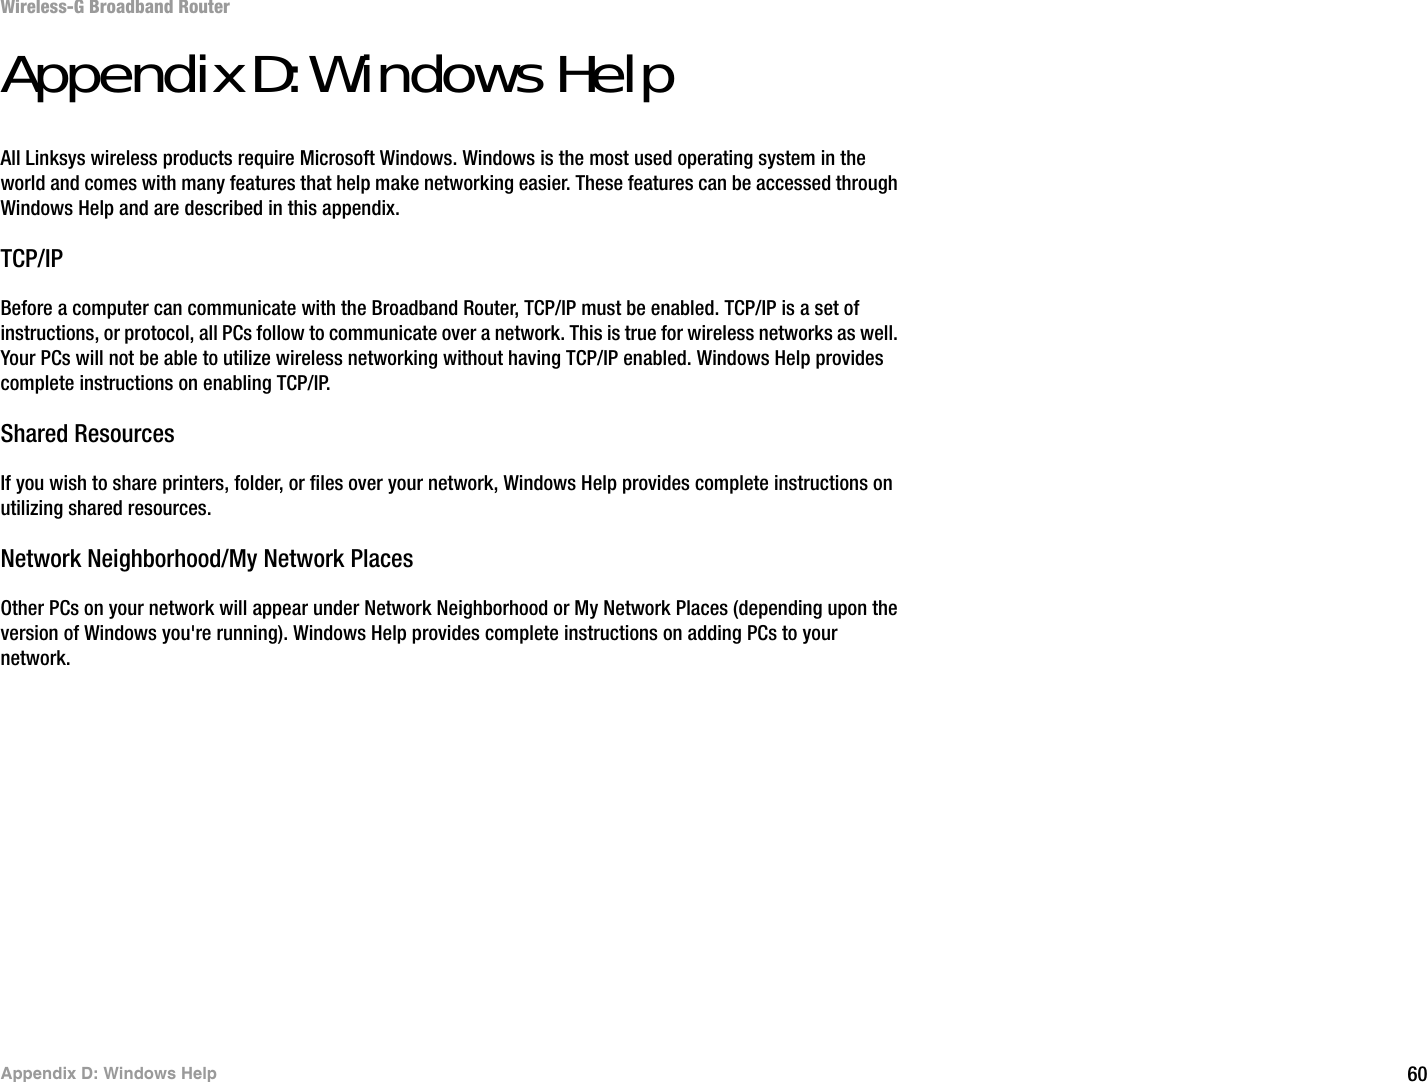 60Appendix D: Windows HelpWireless-G Broadband RouterAppendix D: Windows HelpAll Linksys wireless products require Microsoft Windows. Windows is the most used operating system in the world and comes with many features that help make networking easier. These features can be accessed through Windows Help and are described in this appendix.TCP/IPBefore a computer can communicate with the Broadband Router, TCP/IP must be enabled. TCP/IP is a set of instructions, or protocol, all PCs follow to communicate over a network. This is true for wireless networks as well. Your PCs will not be able to utilize wireless networking without having TCP/IP enabled. Windows Help provides complete instructions on enabling TCP/IP.Shared ResourcesIf you wish to share printers, folder, or files over your network, Windows Help provides complete instructions on utilizing shared resources.Network Neighborhood/My Network PlacesOther PCs on your network will appear under Network Neighborhood or My Network Places (depending upon the version of Windows you&apos;re running). Windows Help provides complete instructions on adding PCs to your network.